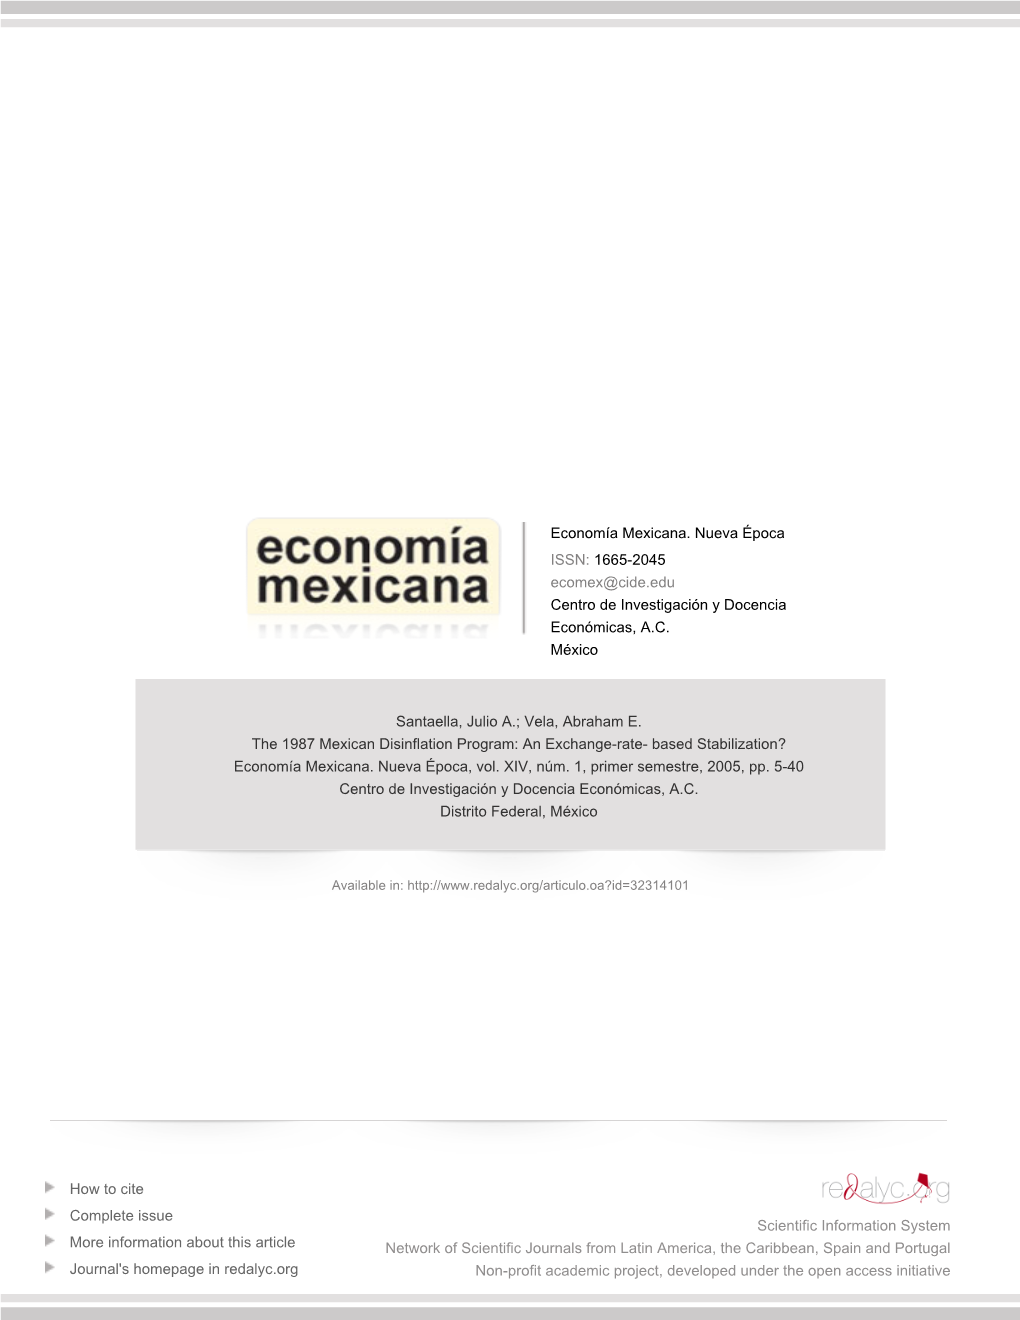 The 1987 Mexican Disinflation Program: an Exchange-Rate-Based